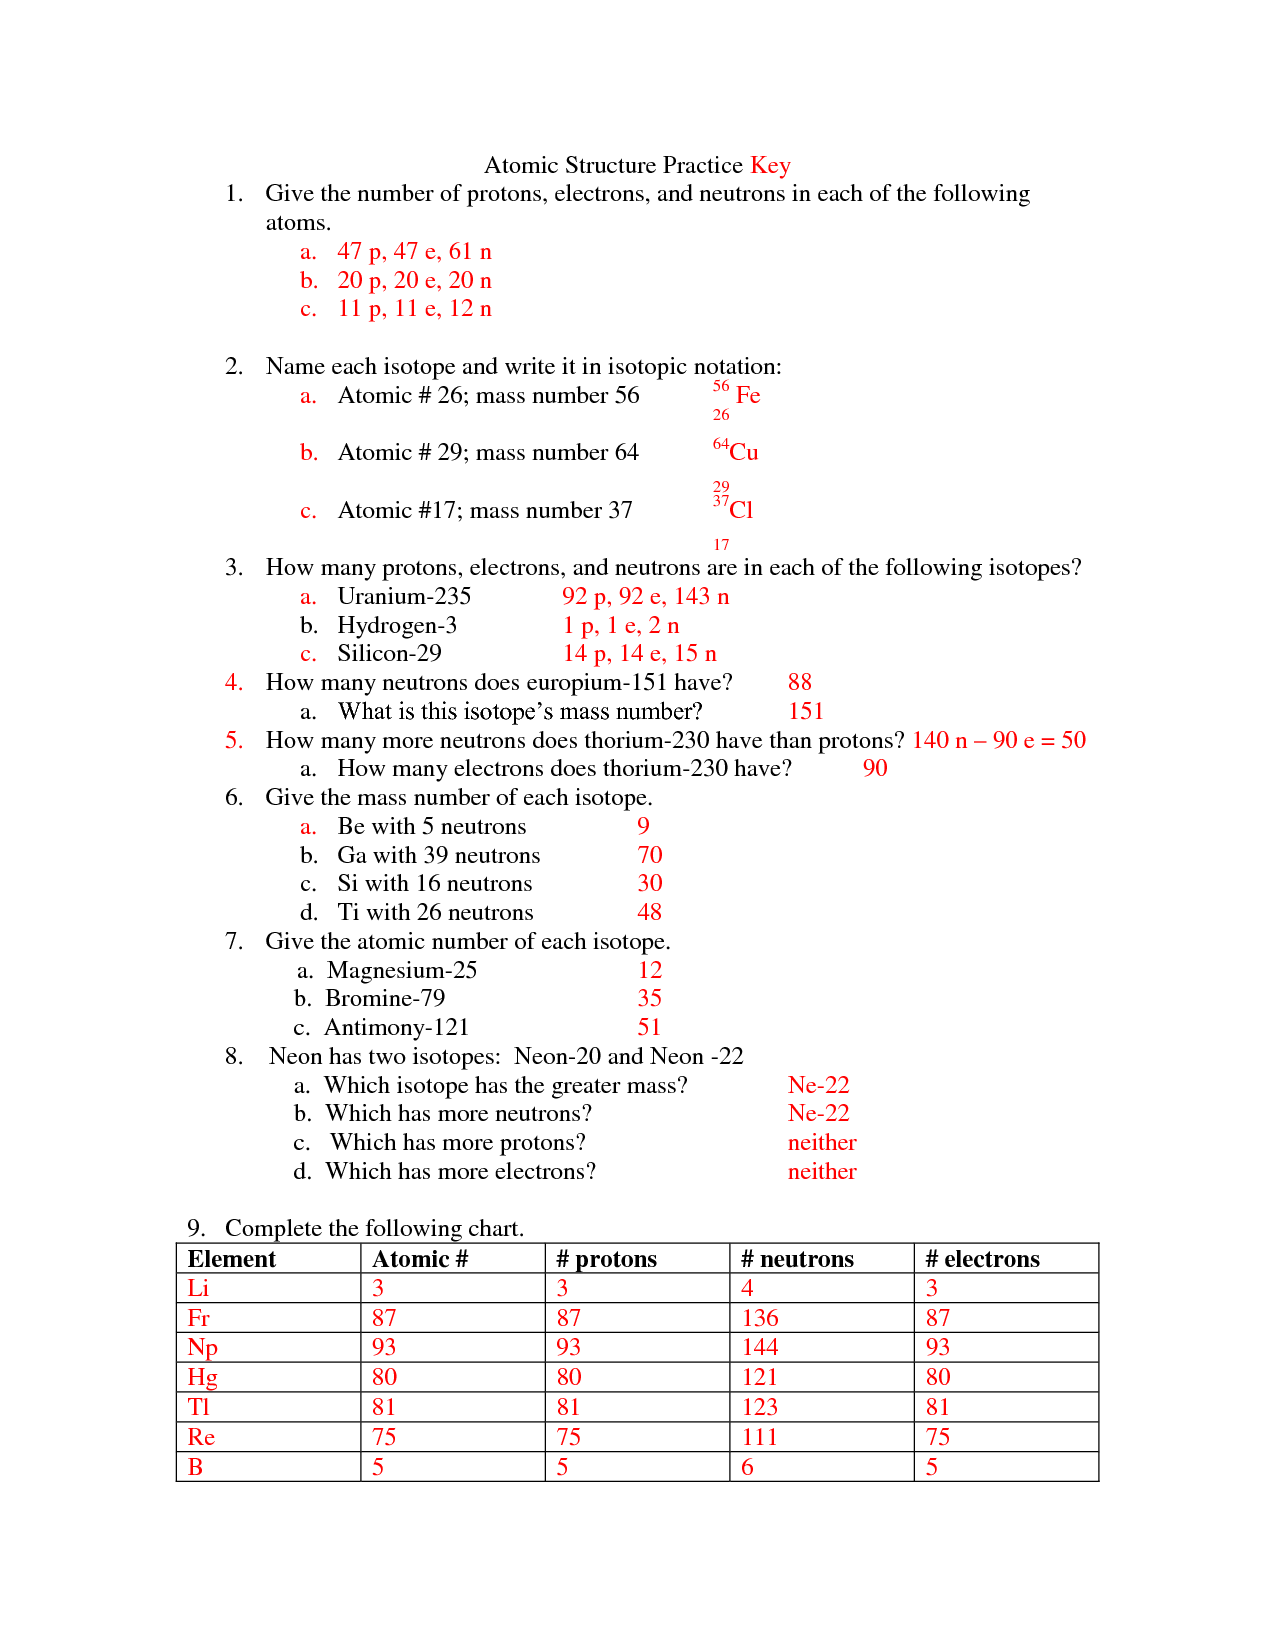 isotopes-practice-worksheet